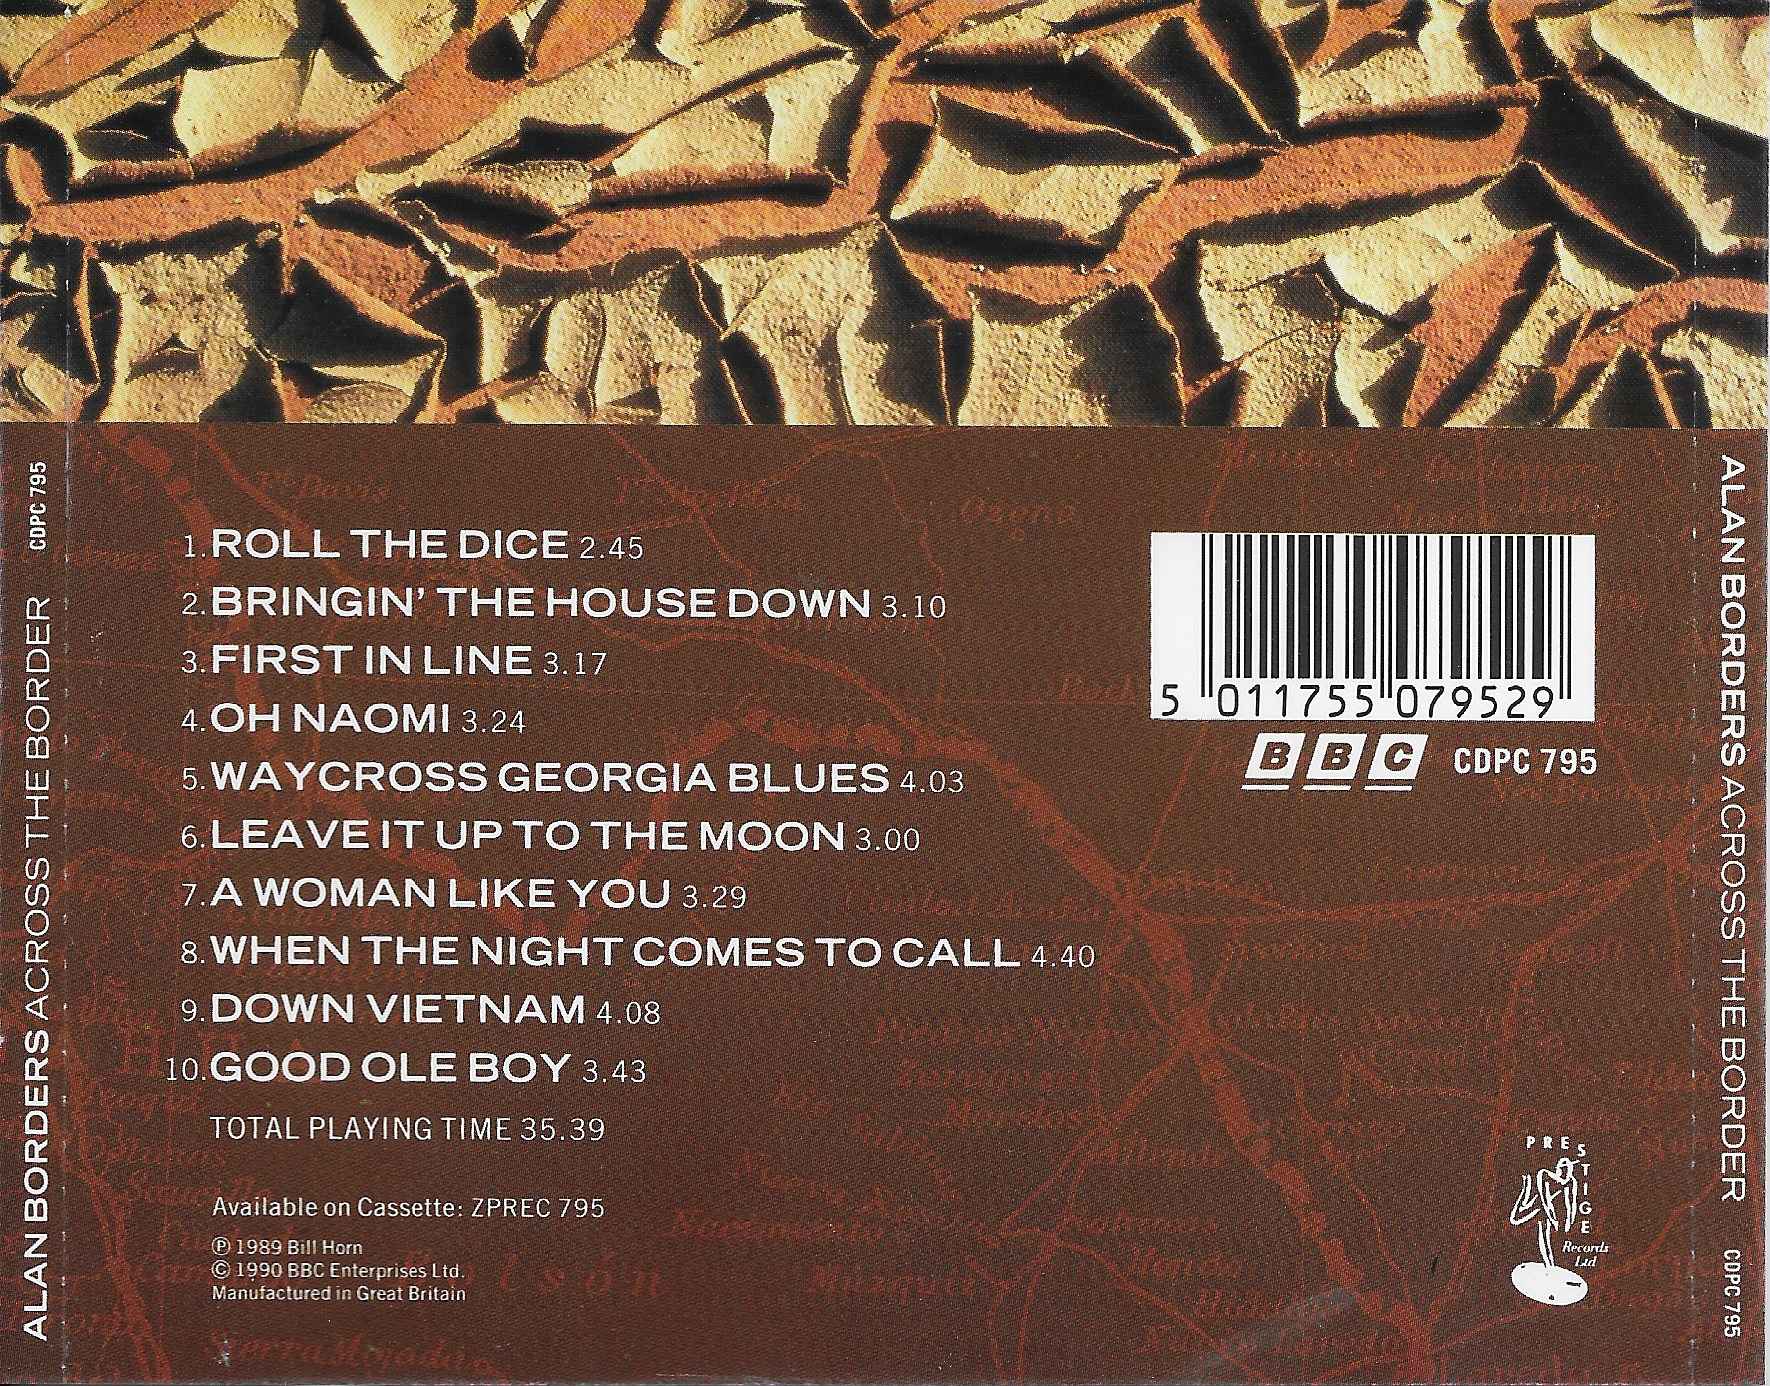 Back cover of CDPC 795